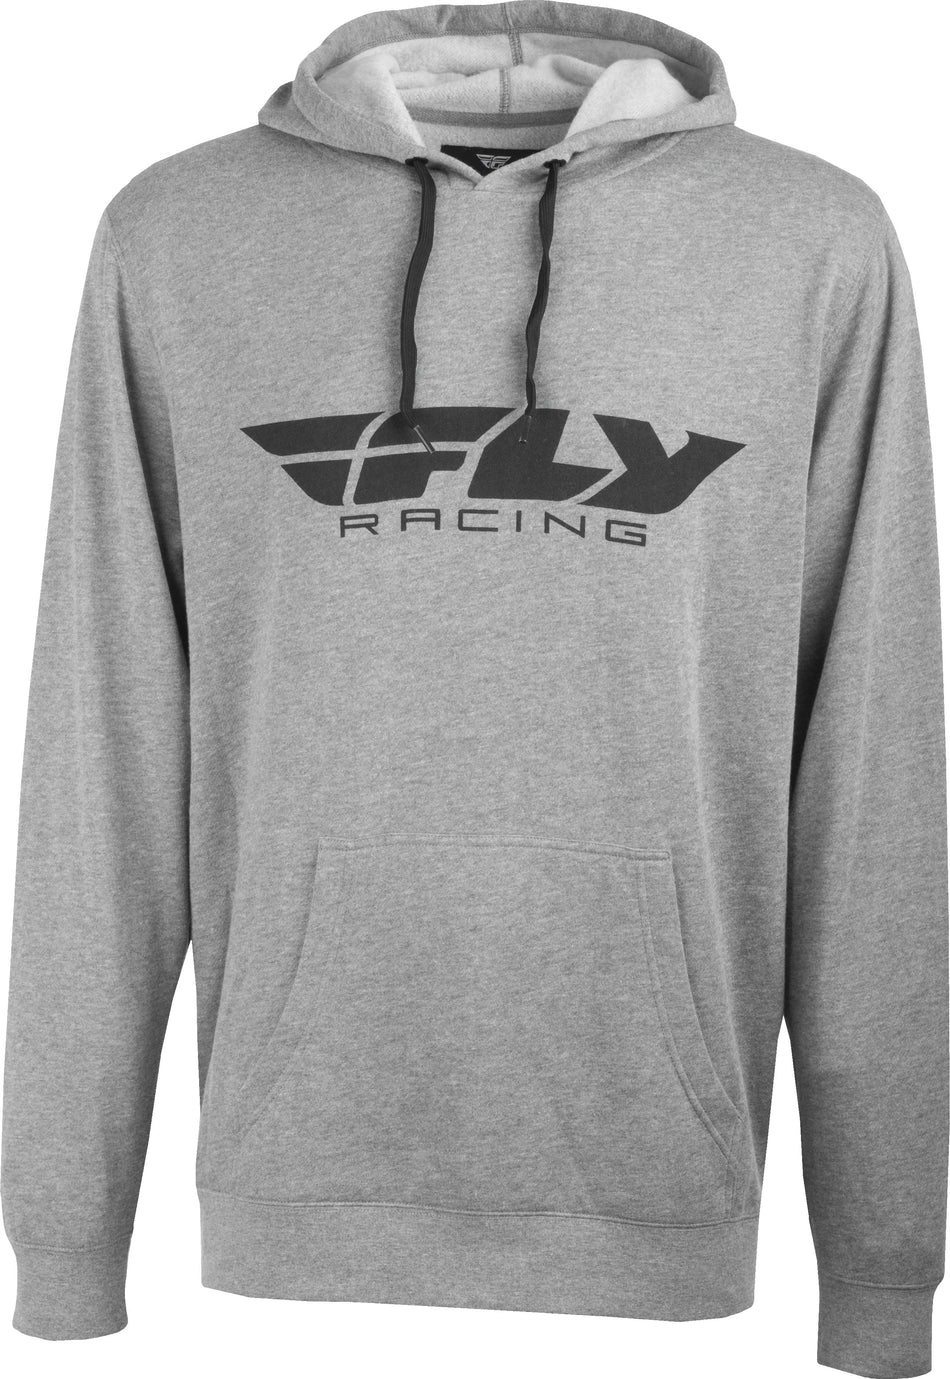 FLY RACING Fly Corporate Pullover Hoodie Grey Heather Md 354-0036M